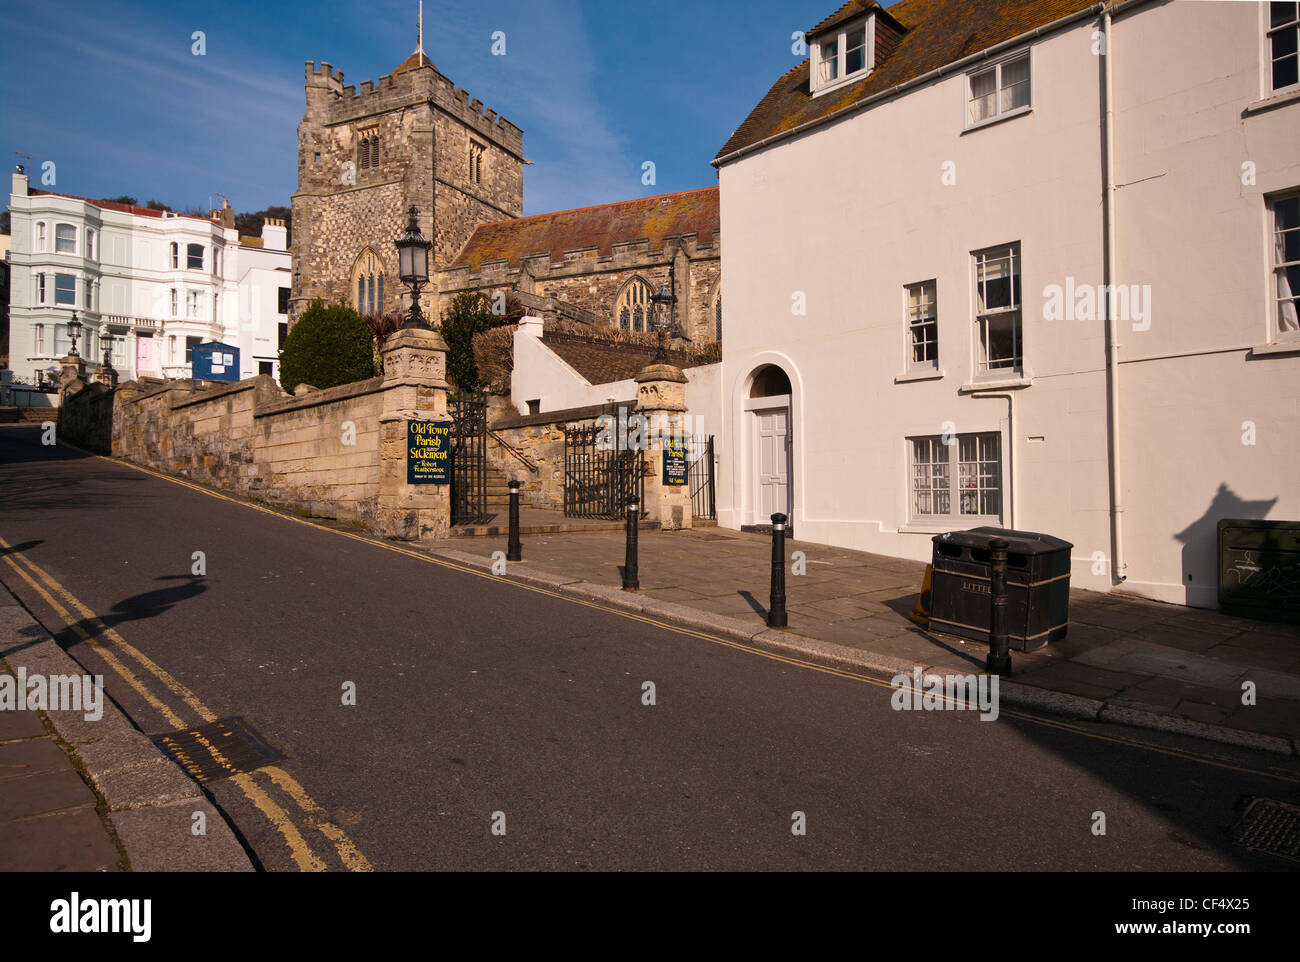 St Clements Parish Church Hastings Old Town Sussex UK Churches Stock Photo